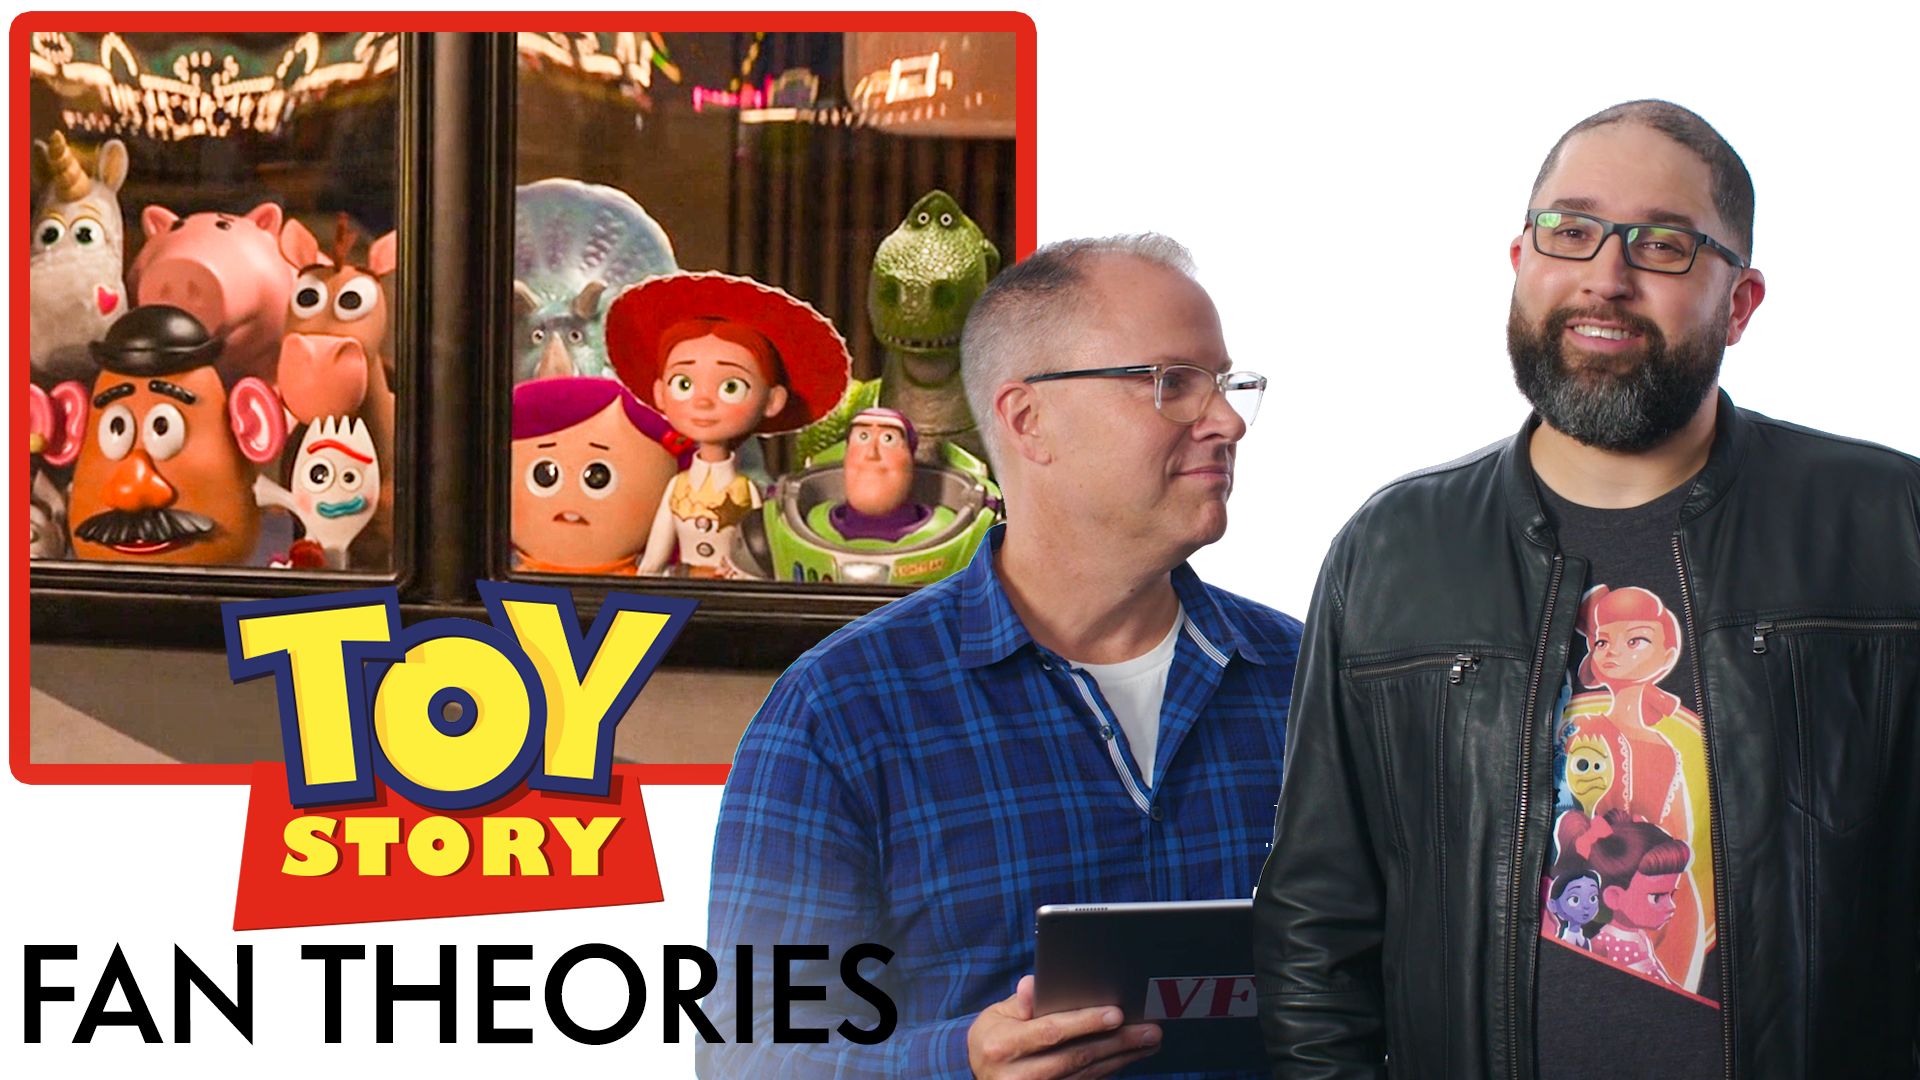 People are relating hard to a new 'Toy Story' character's lust for